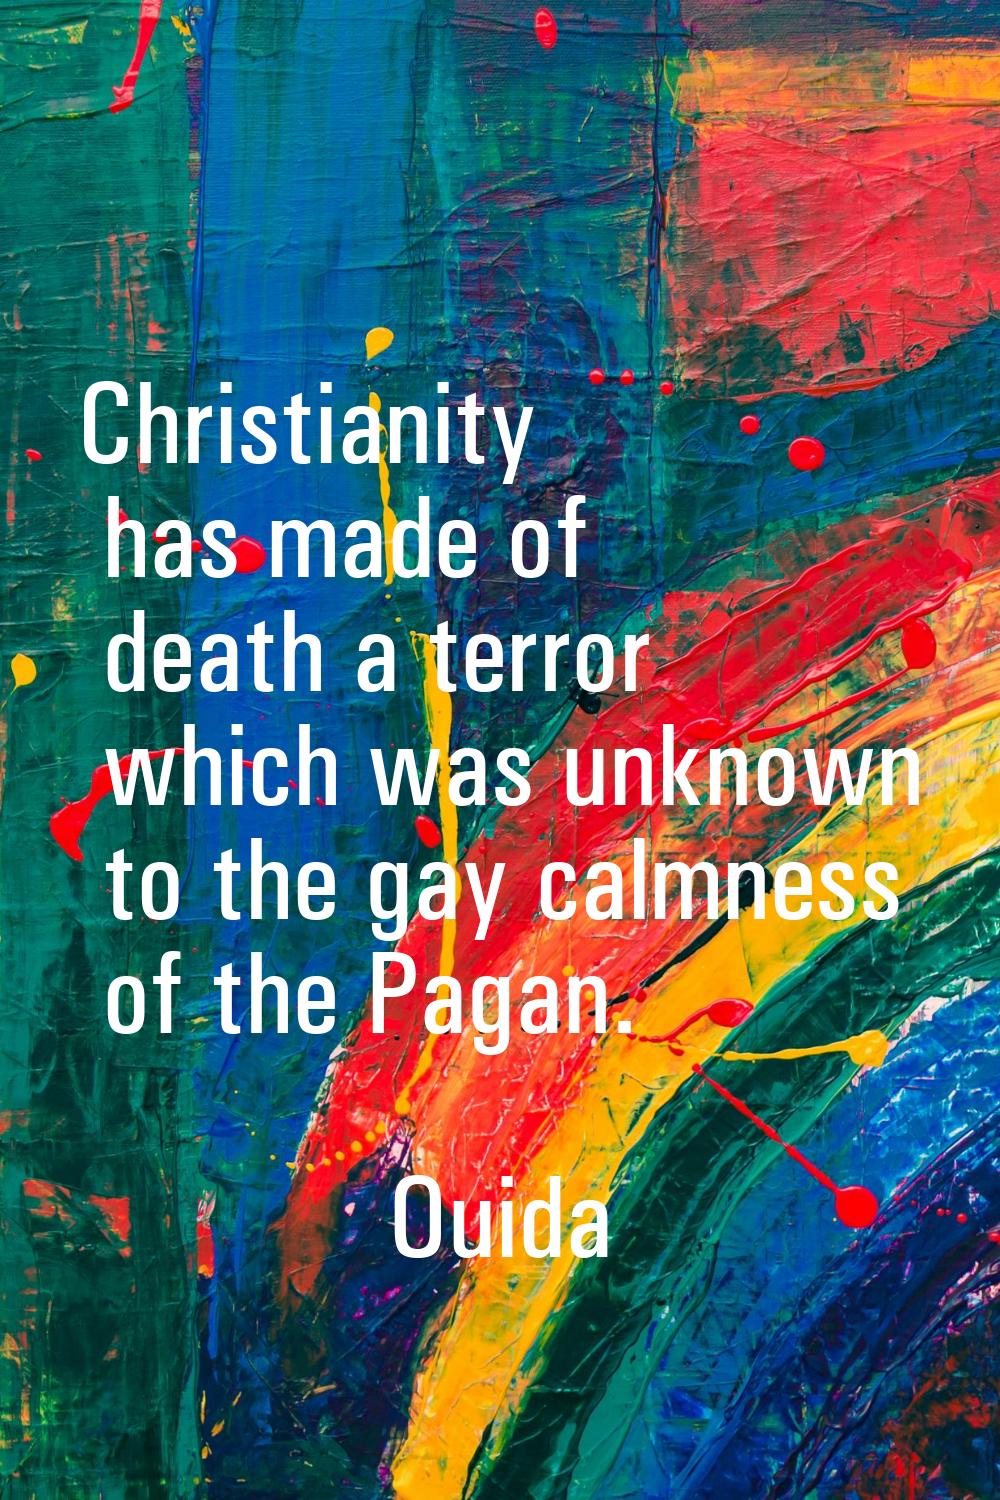 Christianity has made of death a terror which was unknown to the gay calmness of the Pagan.